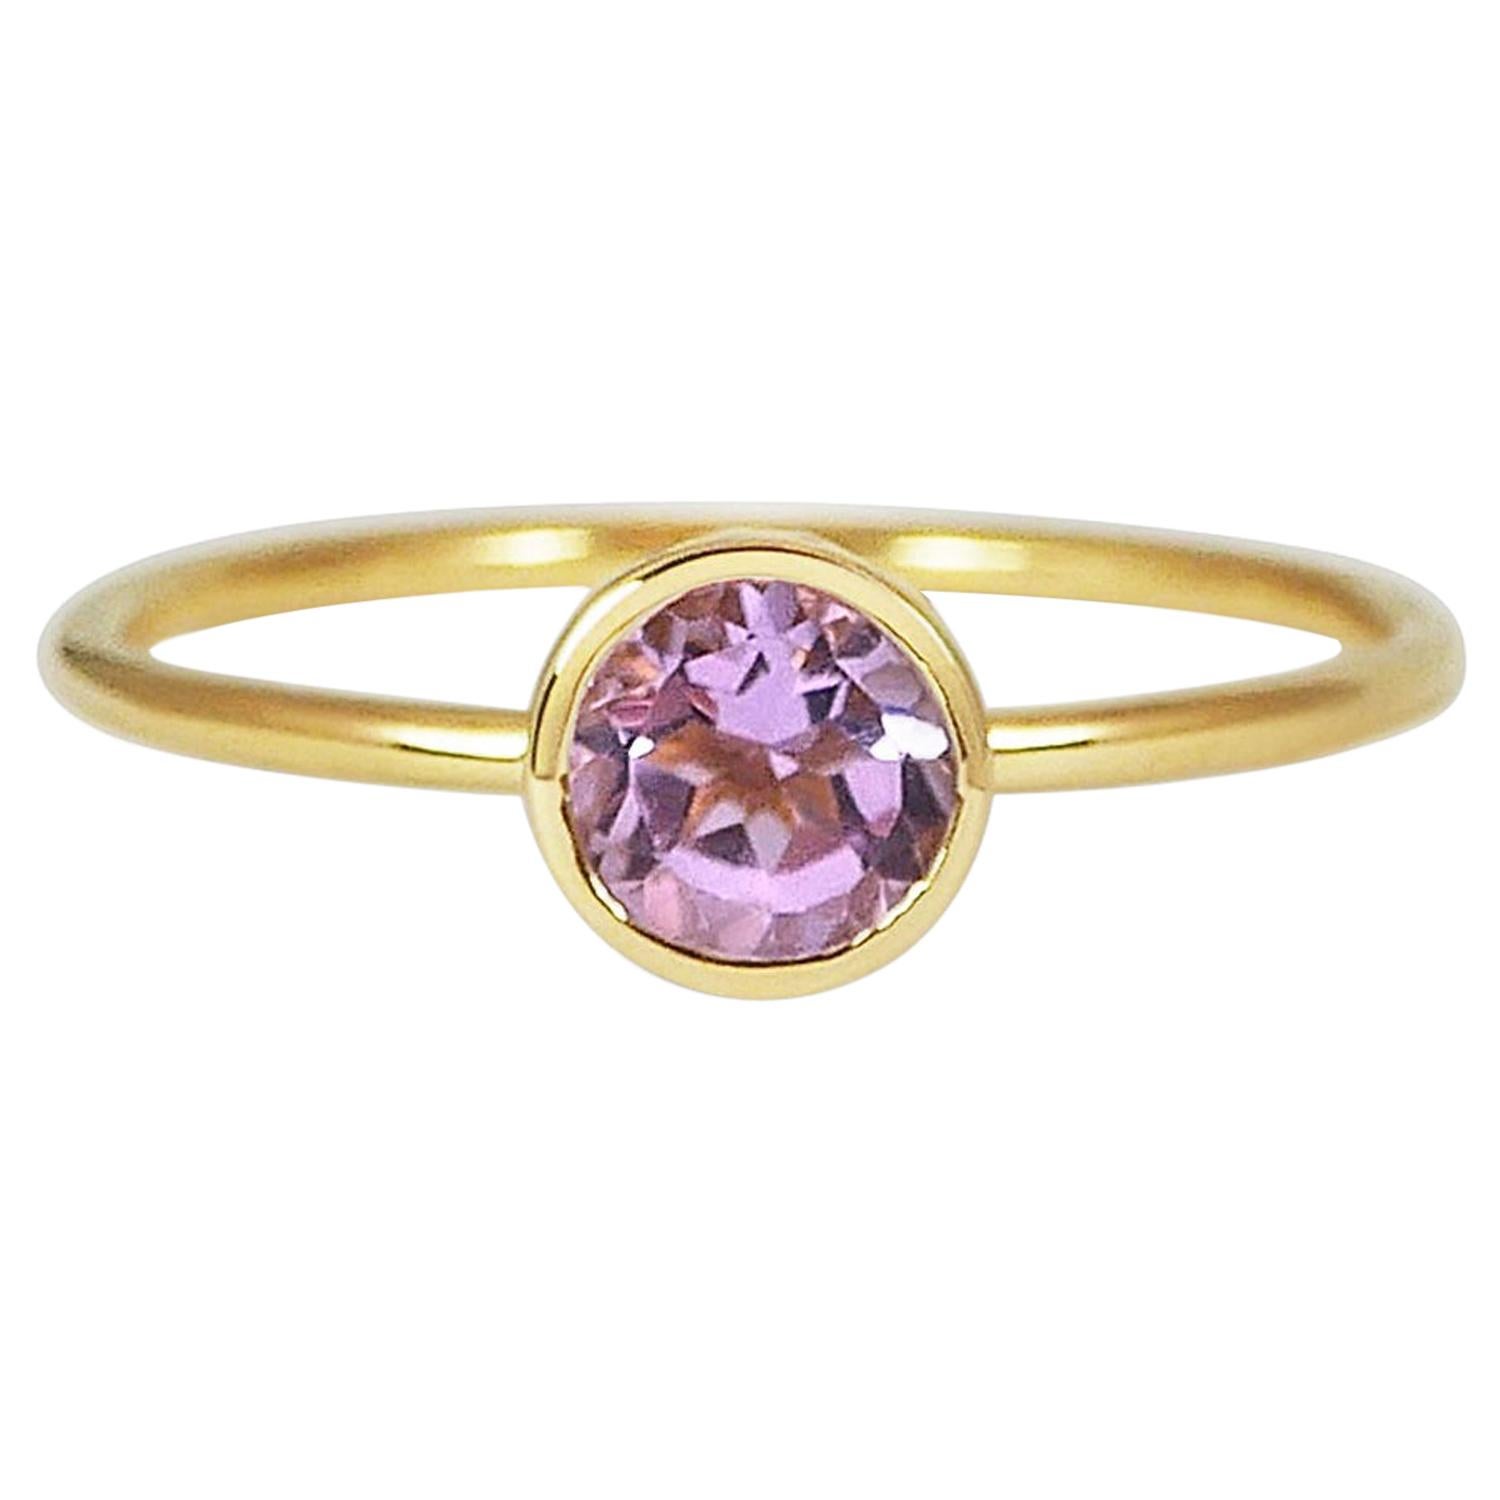 Handcrafted Round Cut 0.50 Carat Amethyst 18 Karat Yellow Gold Solitaire Ring